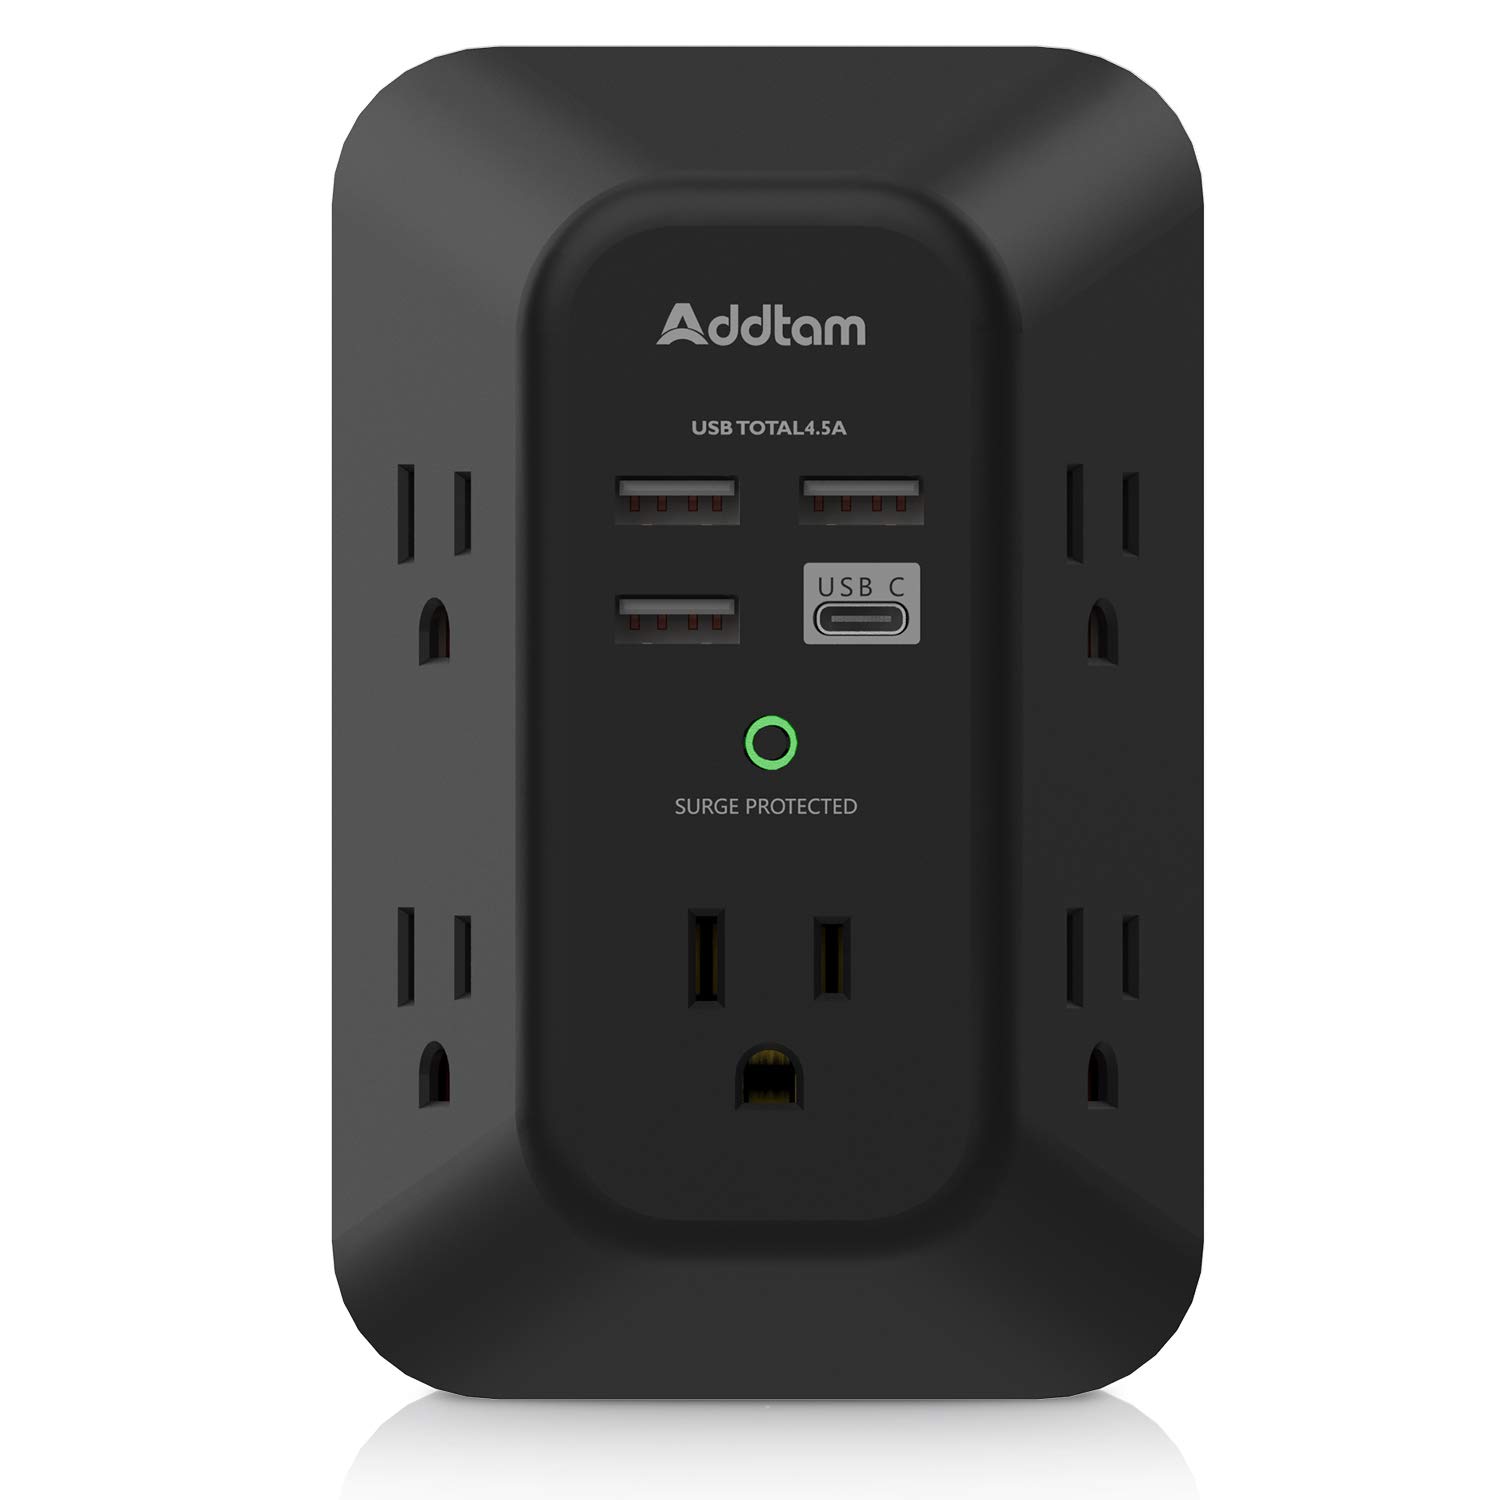 USB Wall Charger Surge Protector - Addtam 5 Outlet Extender with 4 USB Charging Ports (1 USB C), 3-Sided 1800J Power Strip Multi Plug Outlets Adapter Widely Spaced,Black